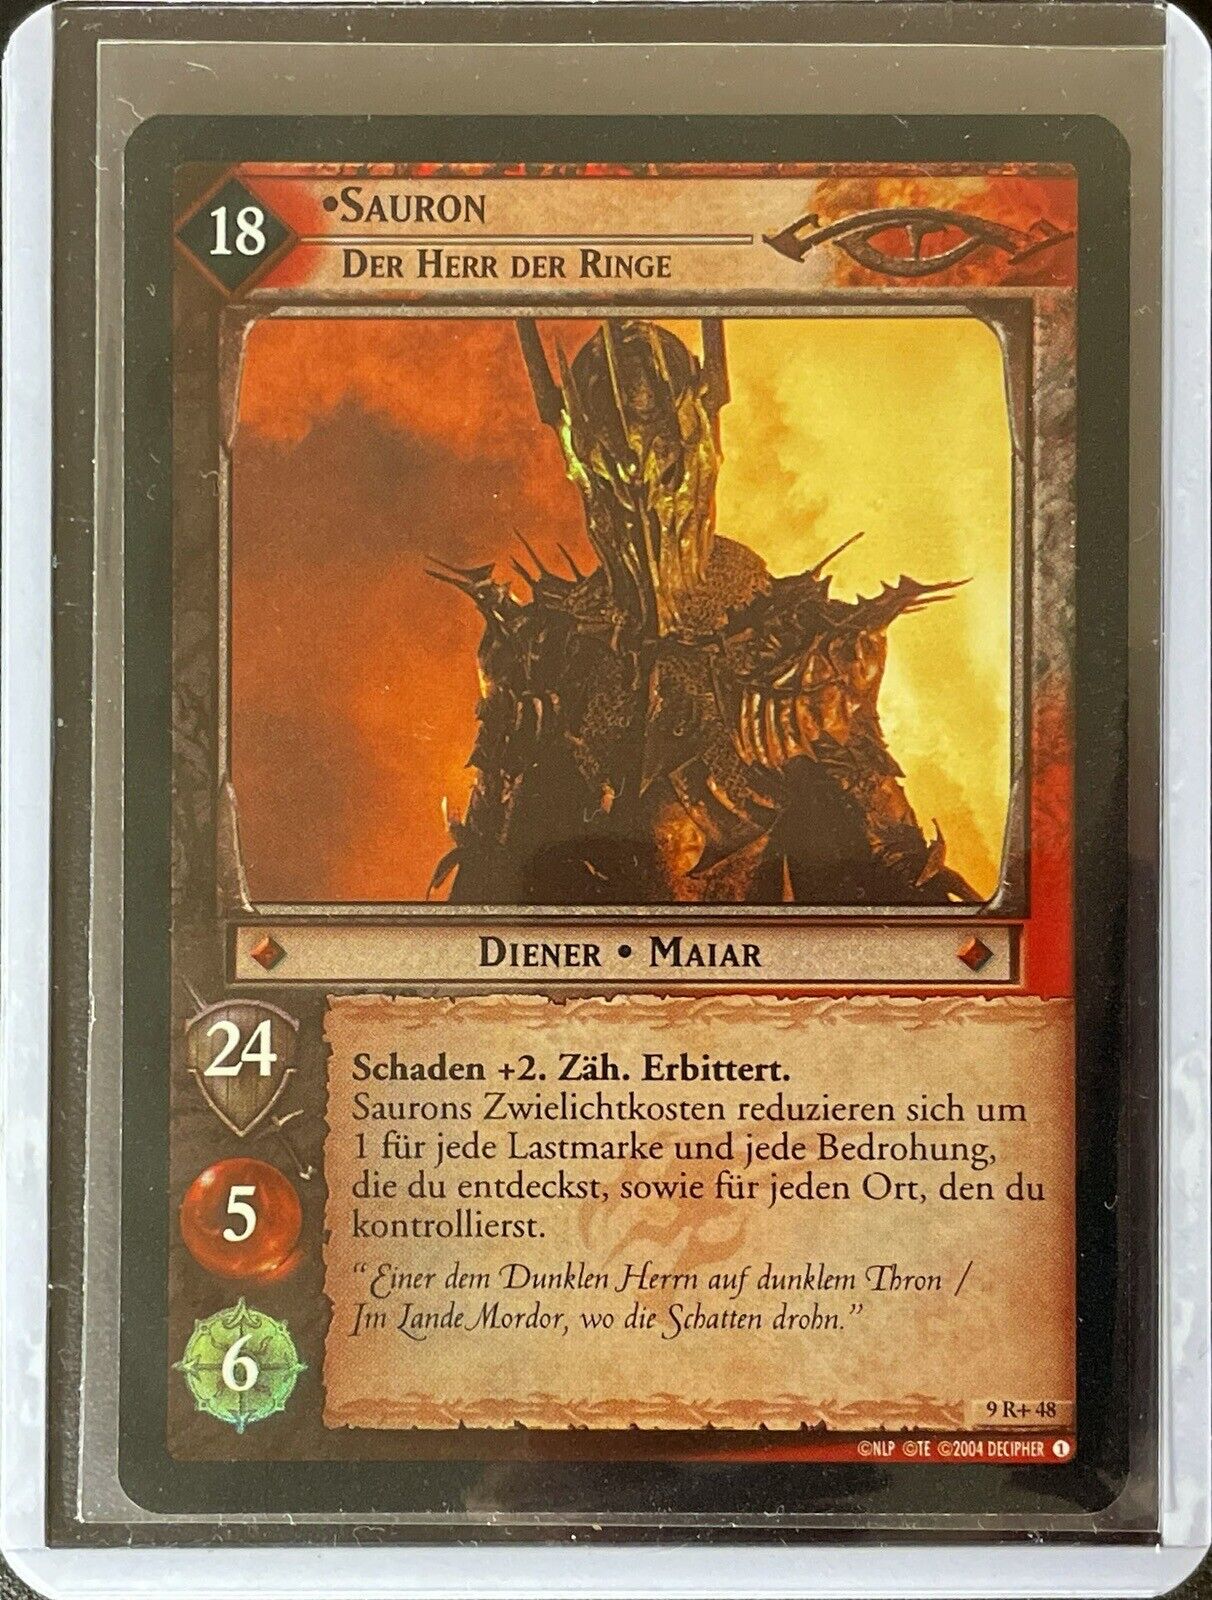 LOTR TCG: Sauron - The Lord of the Ring - German - 9R+48